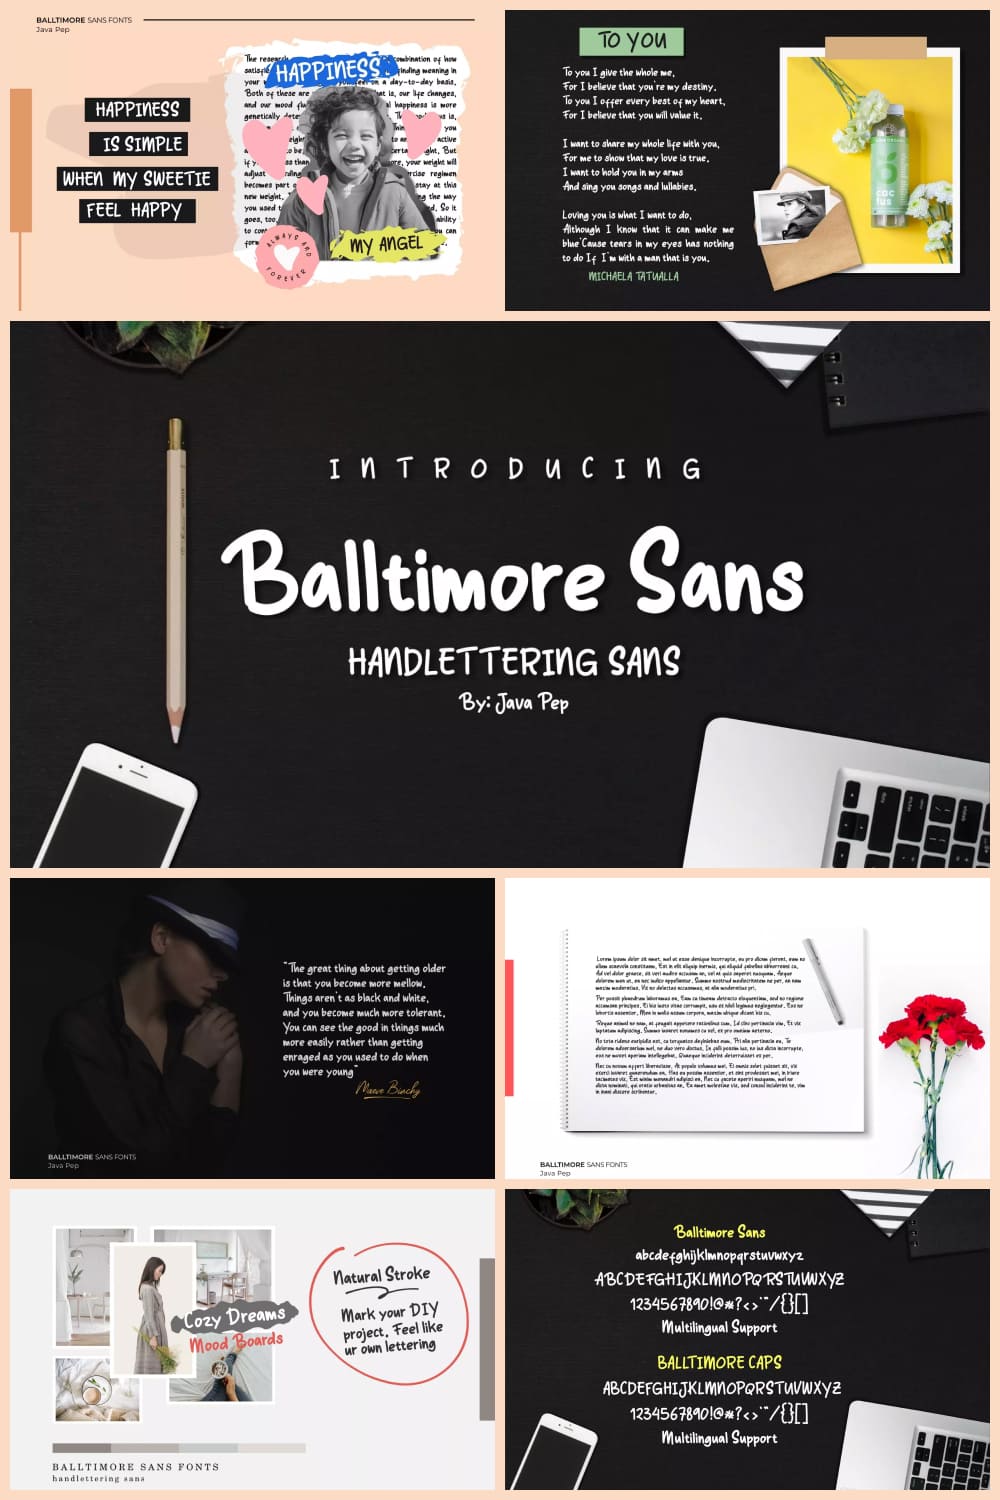 Collage of images using the Balltimore Sans font.